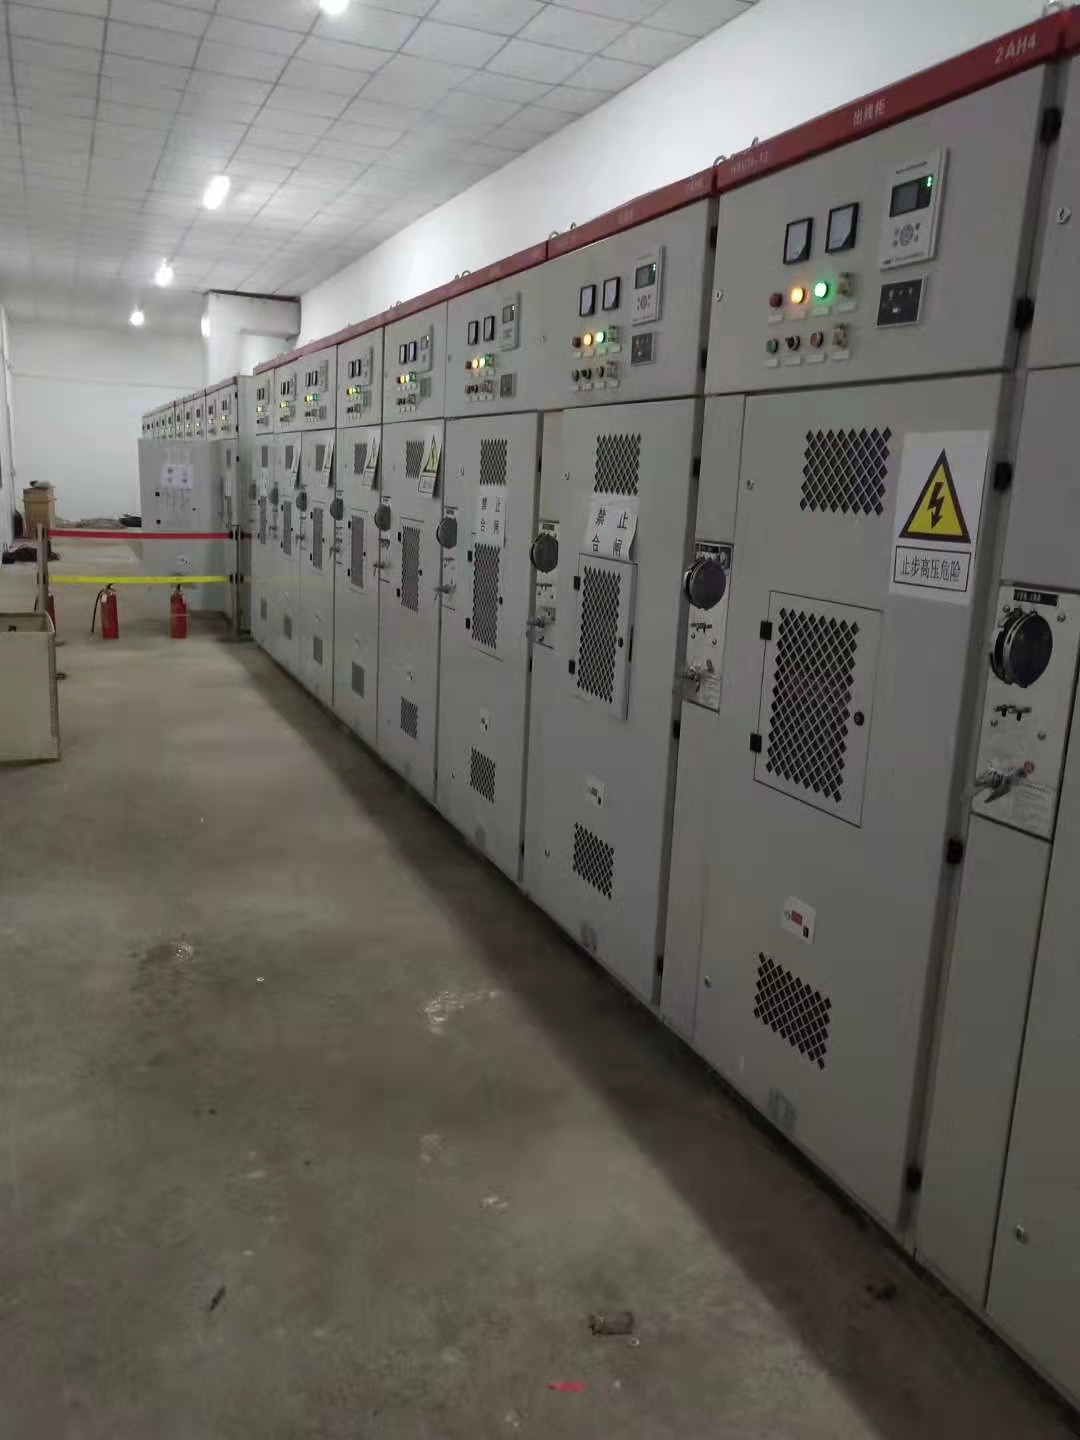 A China cheap network switchgear Factory-SPL- power transformer,electrical transformer,Combined compact substation,Metalclad AC Enclosed Switchgear,Low Voltage Switchgear,Indoor AC Metal Clad Intermediate Switchgear,Non-encapsulated Dry-type Power Transformer,Unwrapped coil dry-type transformer,Epoxy resin cast silicon steel sheet dry-type transformer,Epoxy resin cast amorphous alloy dry-type transformer,Amorphous alloy oil-immersed power transformer,Silicon steel sheet oil-immersed power,electric transformer,Distribution Transformer,voltage transformer,step-down transformer,reducing transformer,low-loss power transformer,loss power transformer,Oil-type Transformer,Oil Distribution Transformer,Transformer-Oil-lmmersed,Oil Transformer,Oil Immersed Transformer,three phase oil immersed power transformer,oil filled electrical transformer,Sealed amorphous alloy power transformer,Dry Type Transformer,dry Transformer,Cast Resin Dry Type Transformer,dry-type transformer,resin-casting type transformer,resinated dry type transformer,CRDT,Unwrapped coil power transformer,three phase dry Transformer,articulated unit substation,AS,Modular substation,transformer substation,electric substation,Power Sub-station,Preinstalled substation,YBM,prefabricated substation,Distribution Substation,compact substation,MV power stations,LV power stations,HV power stations,Switchgear Cabinet,MV Switchgear Cabinet,LV Switchgear Cabinet,HV Switchgear Cabinet,pull-out switch cabinet,Ac metal closed ring network switchgear,Indoor metal armored central switchgear,Box-type substation,custom transformers,customized transformers,Metal enclosed electrical switchgear,LV Switchgear Cabinet,